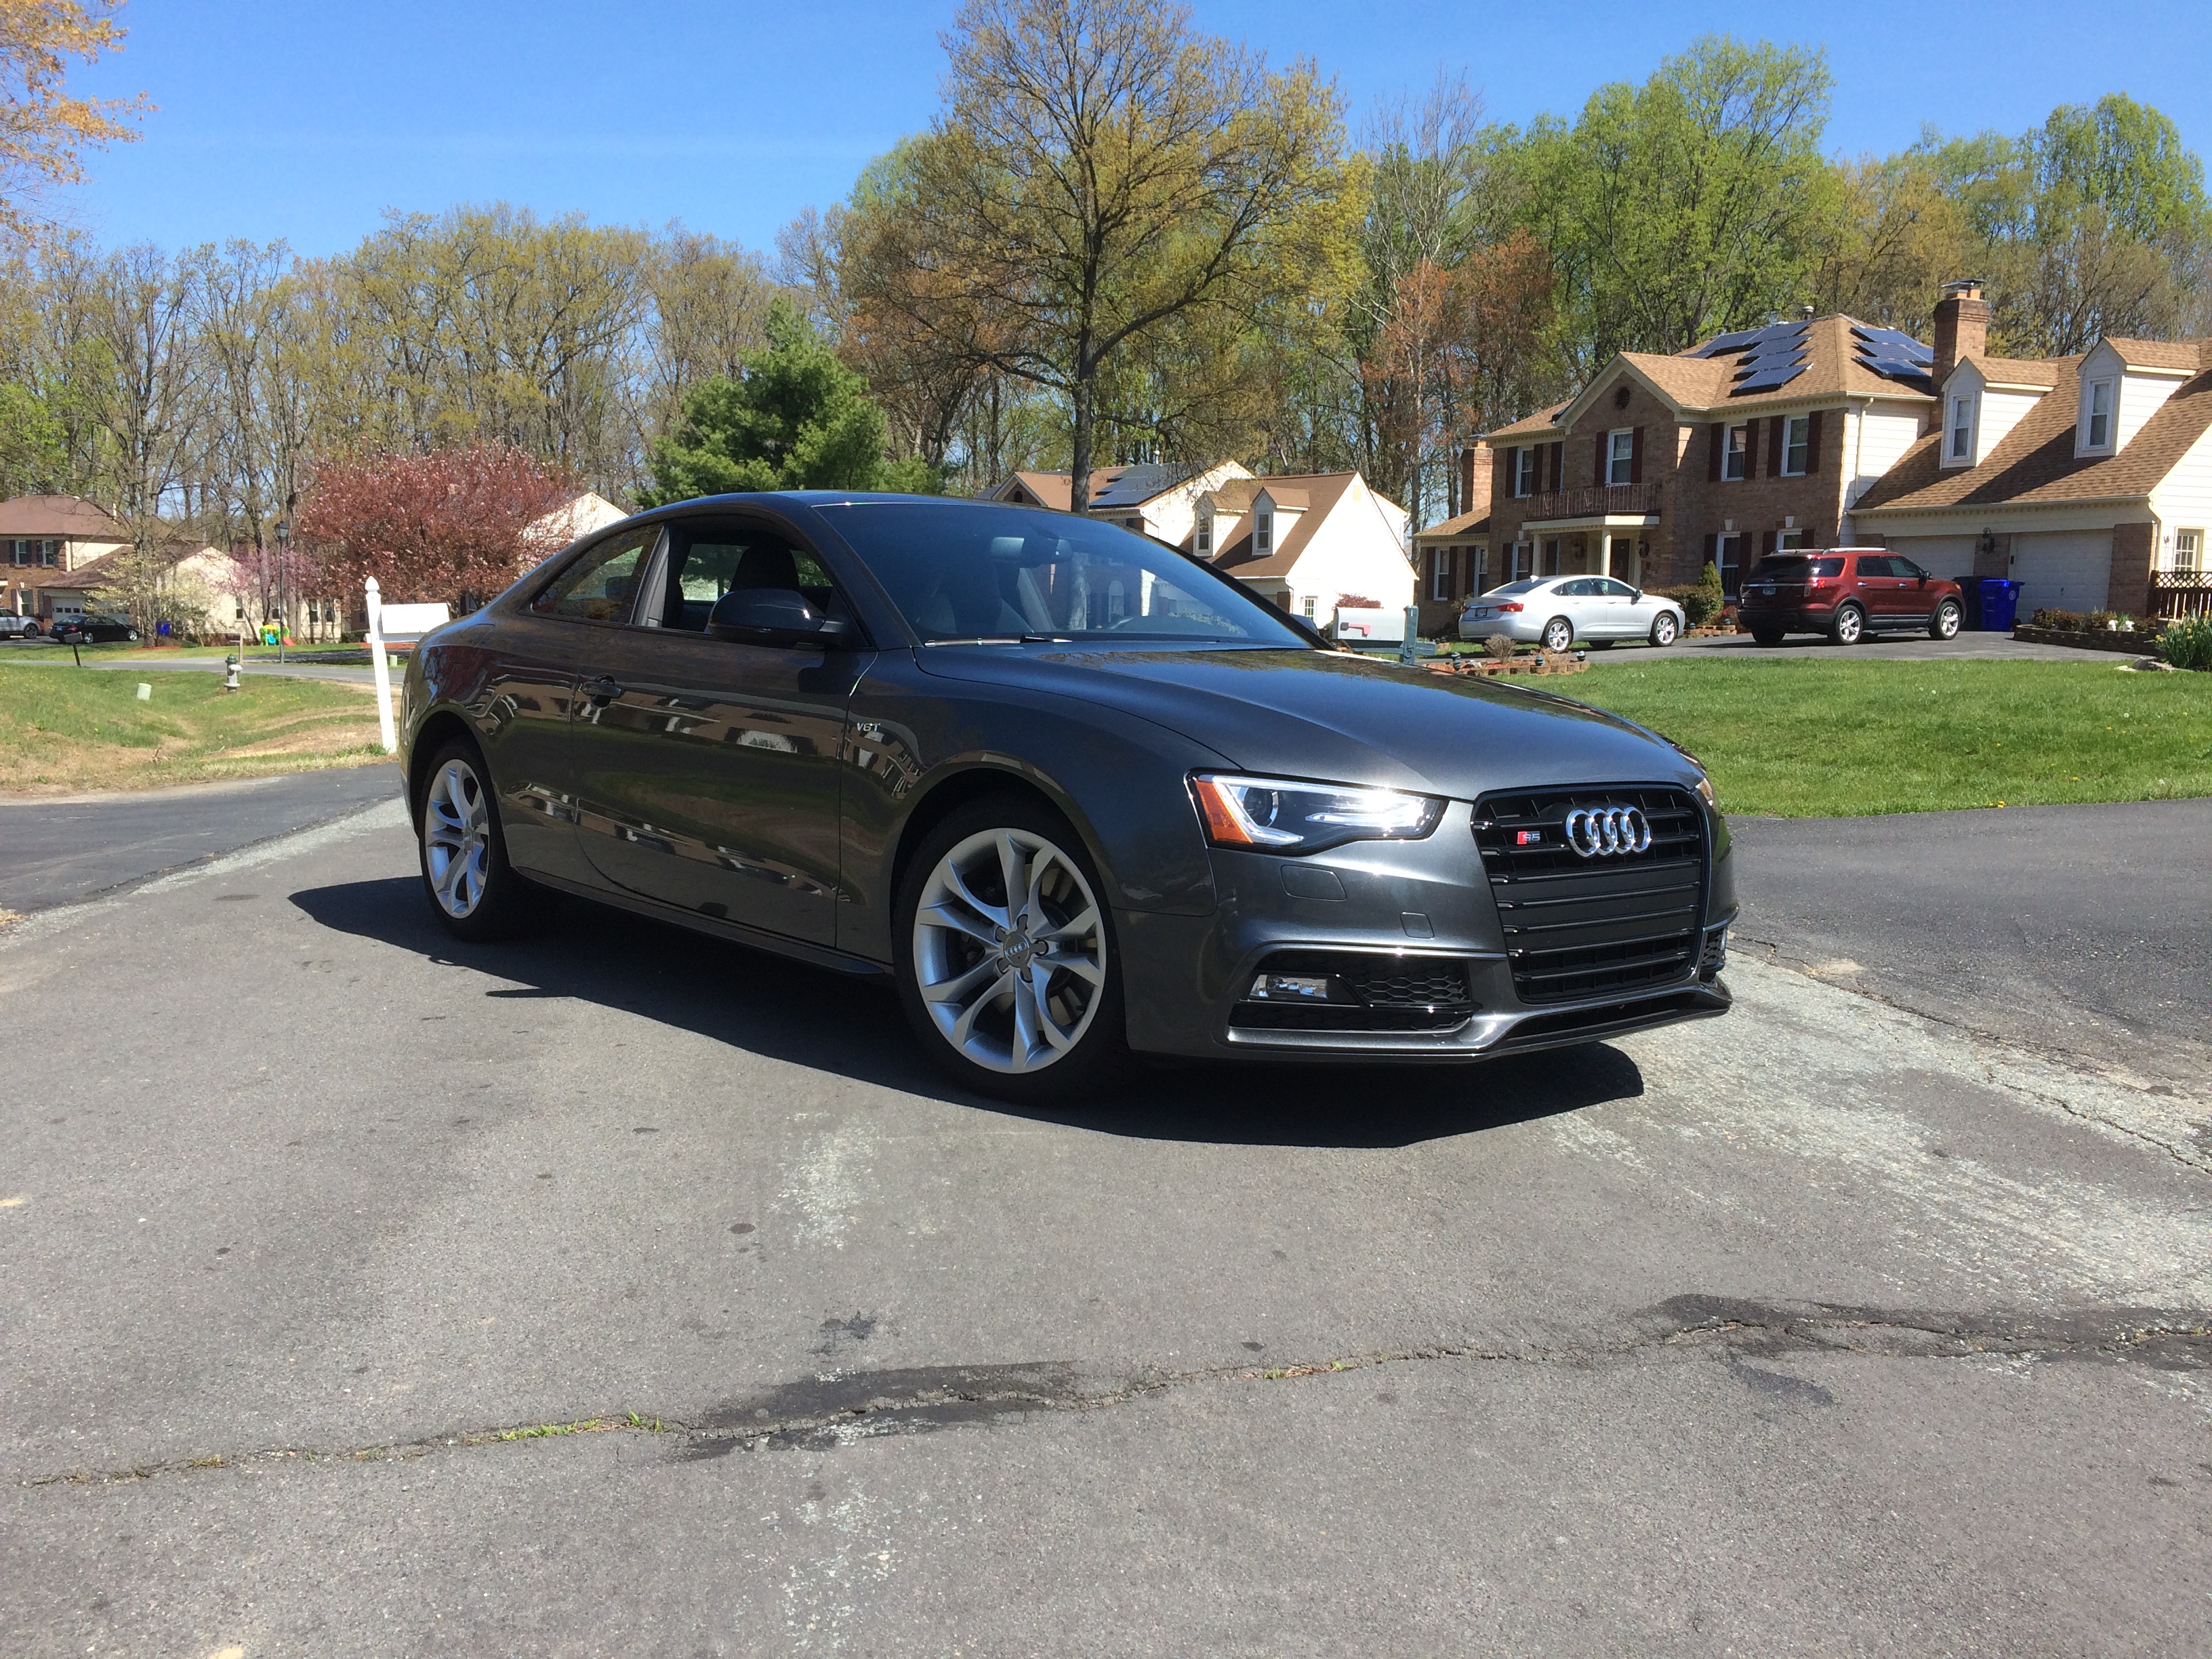 This year’s Audi S5 coupe fun to drive, but somewhat dated